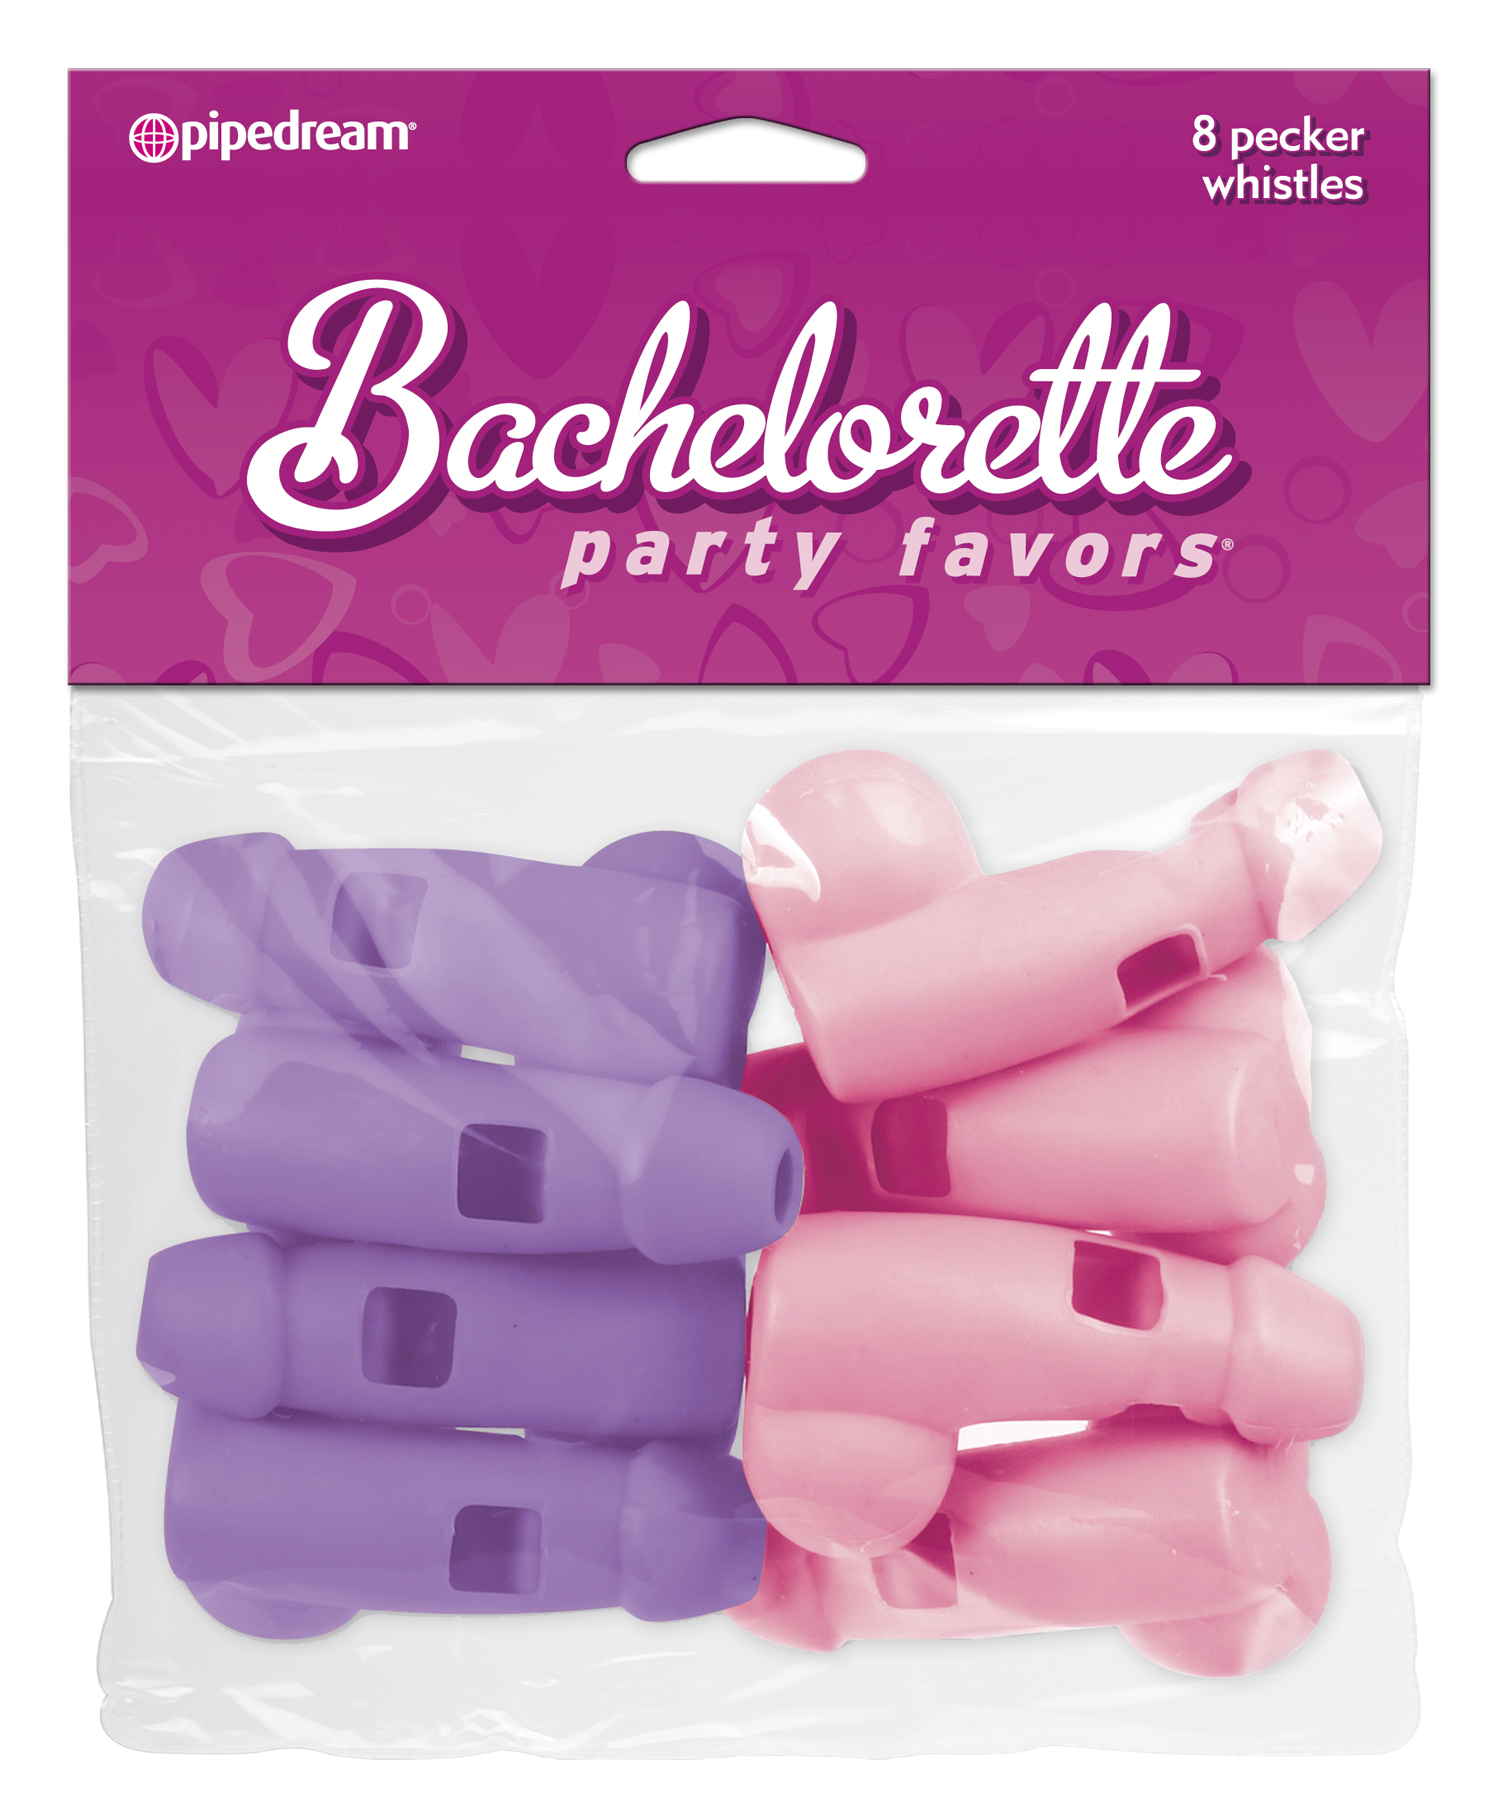 Bachelorette Party Favors 8 Pecker Whistles - Pink and Purple